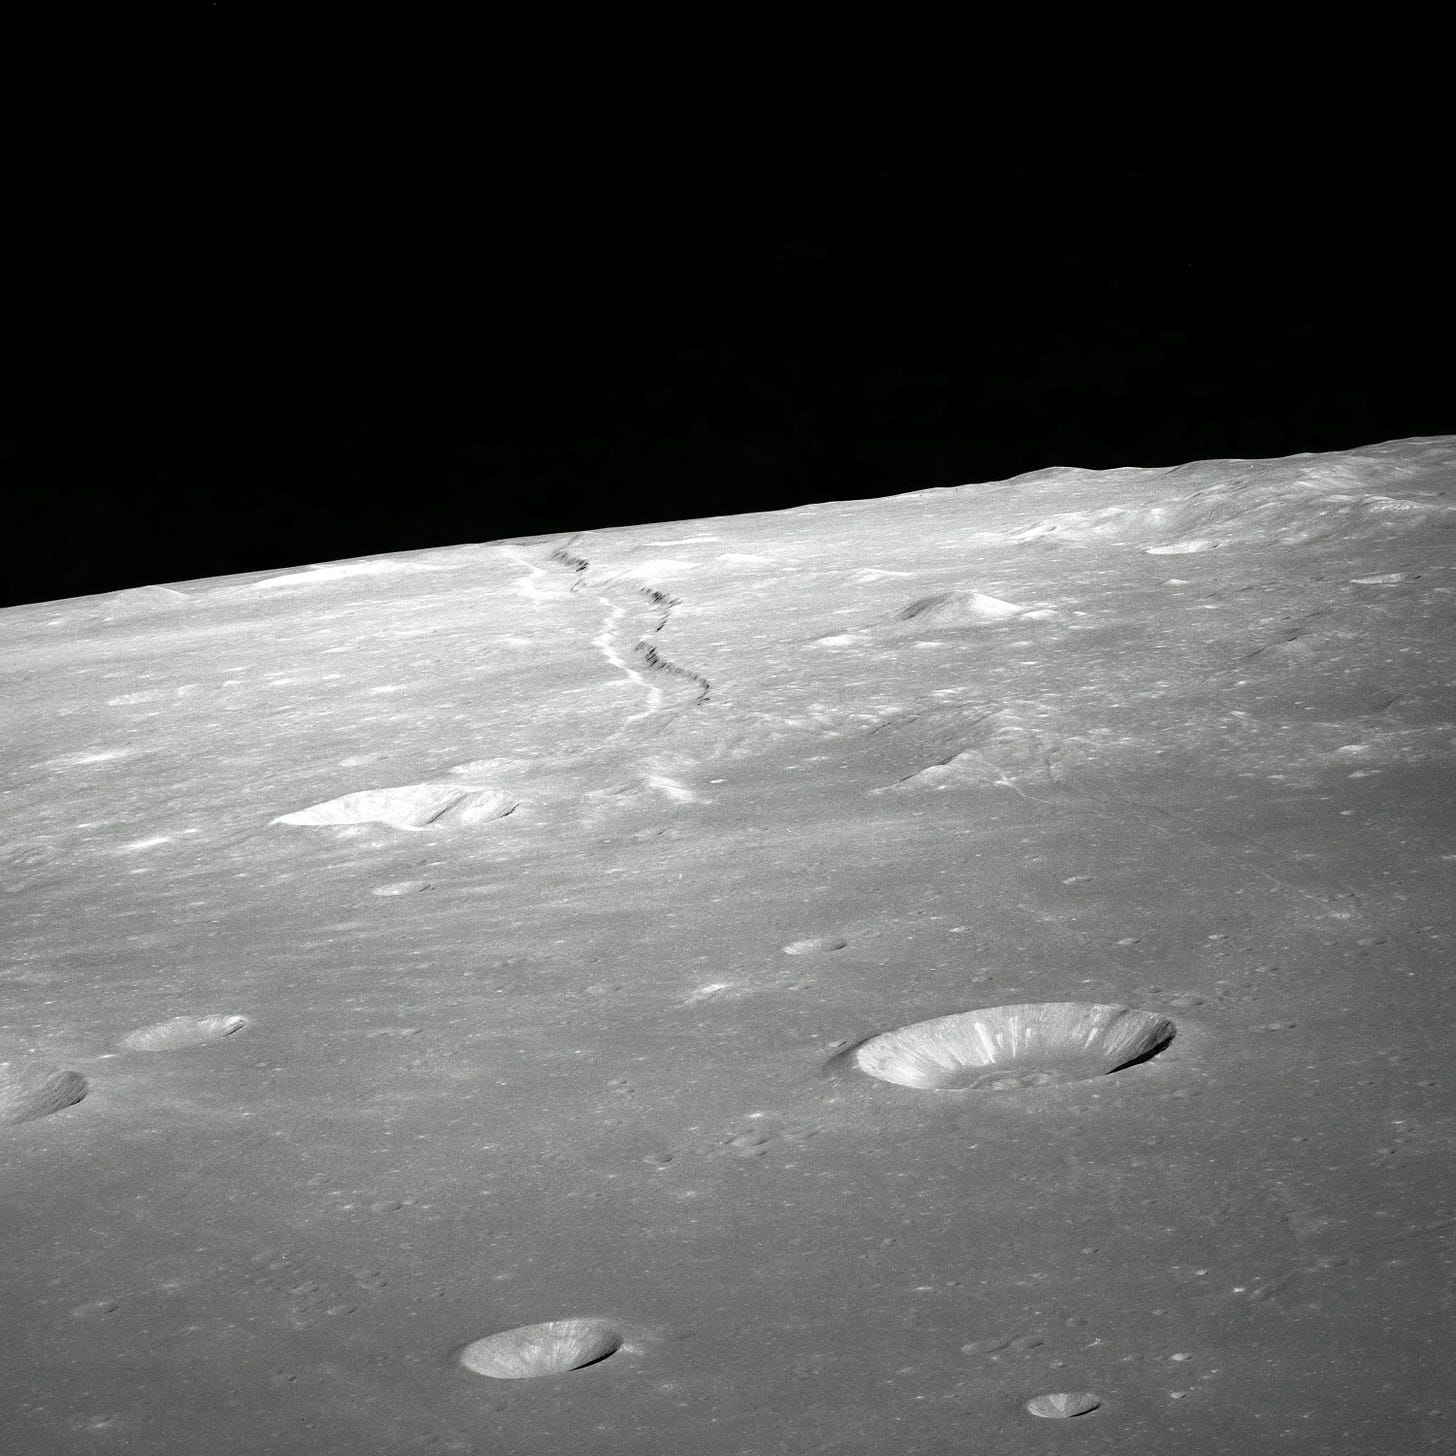 A photo of the lunar surface, showing several craters of various sizes, against a black starless sky